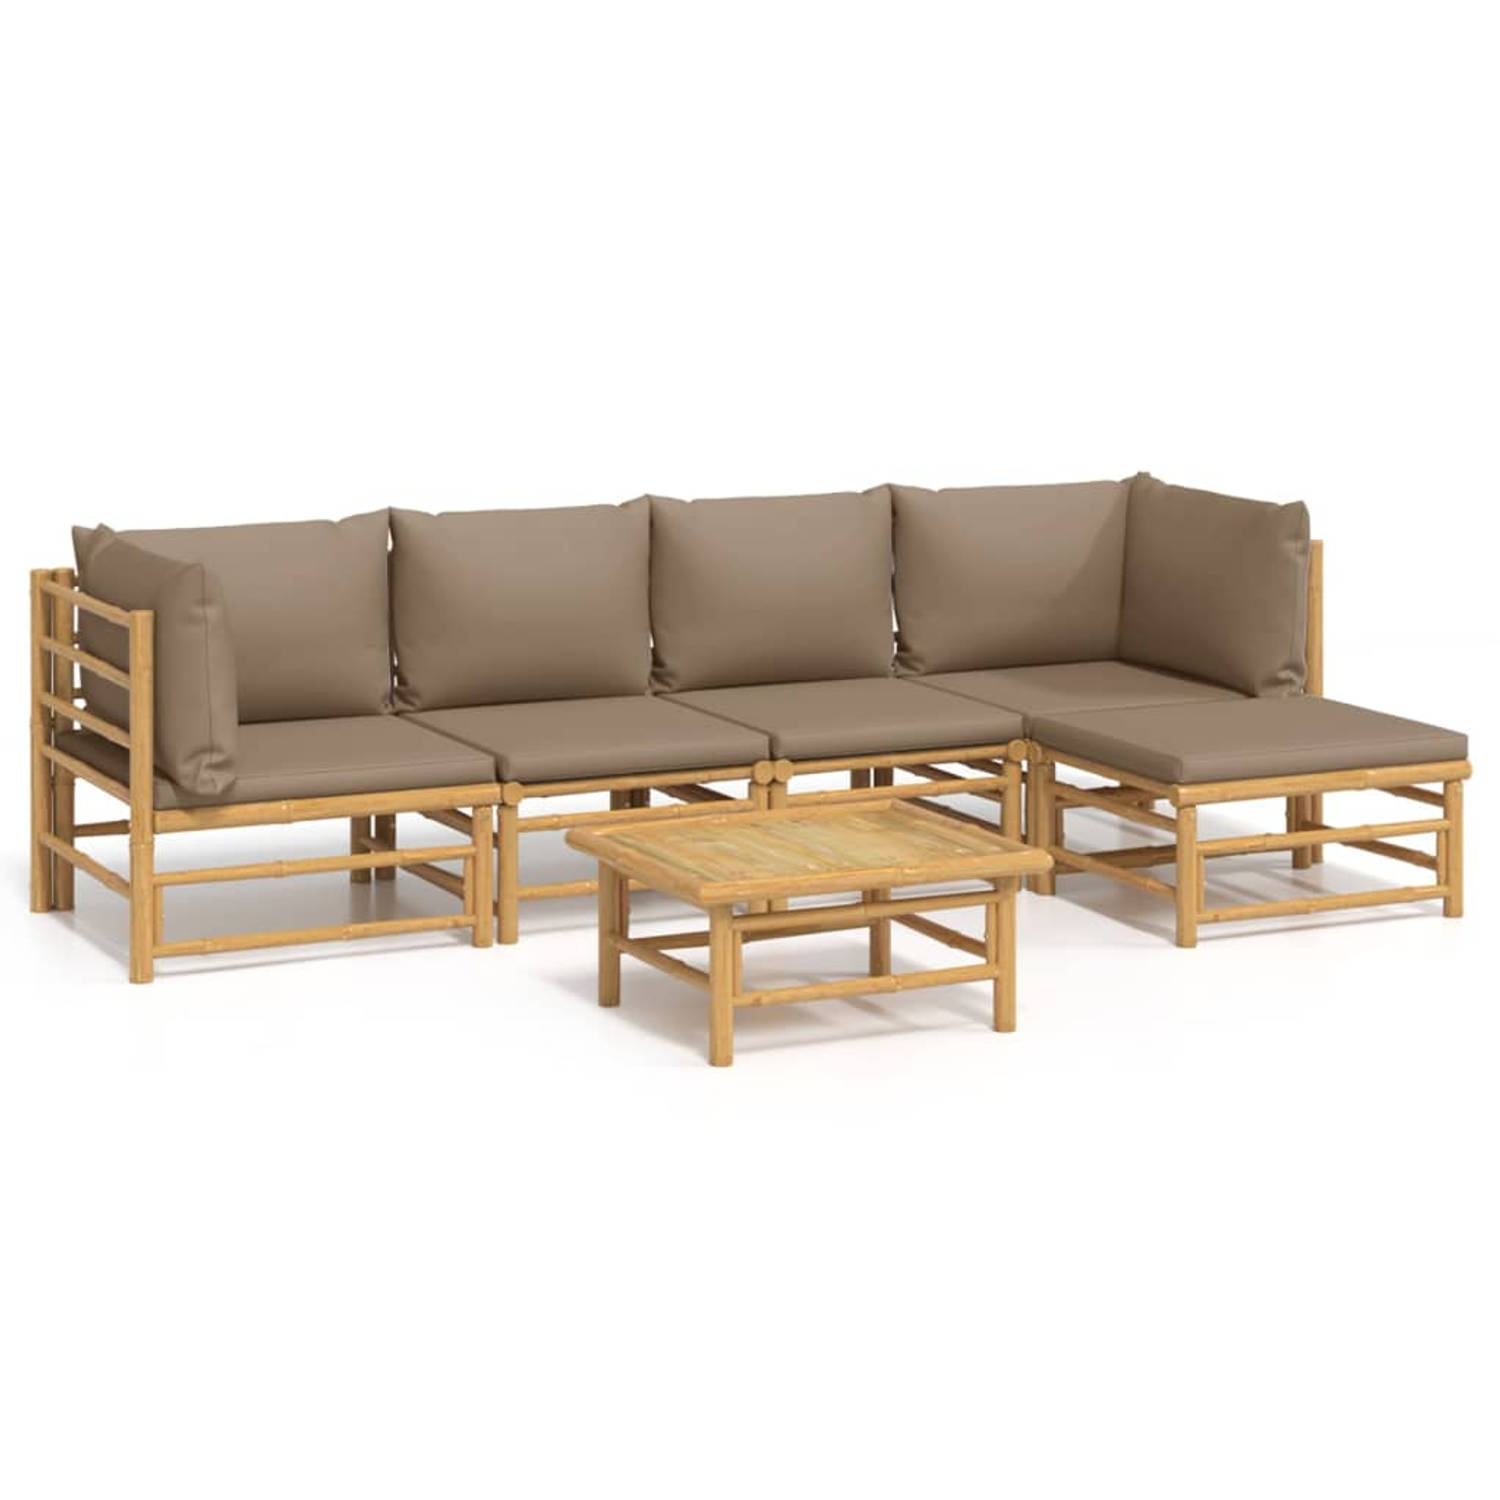 The Living Store 6-delige Loungeset met kussens bamboe taupe - Tuinset